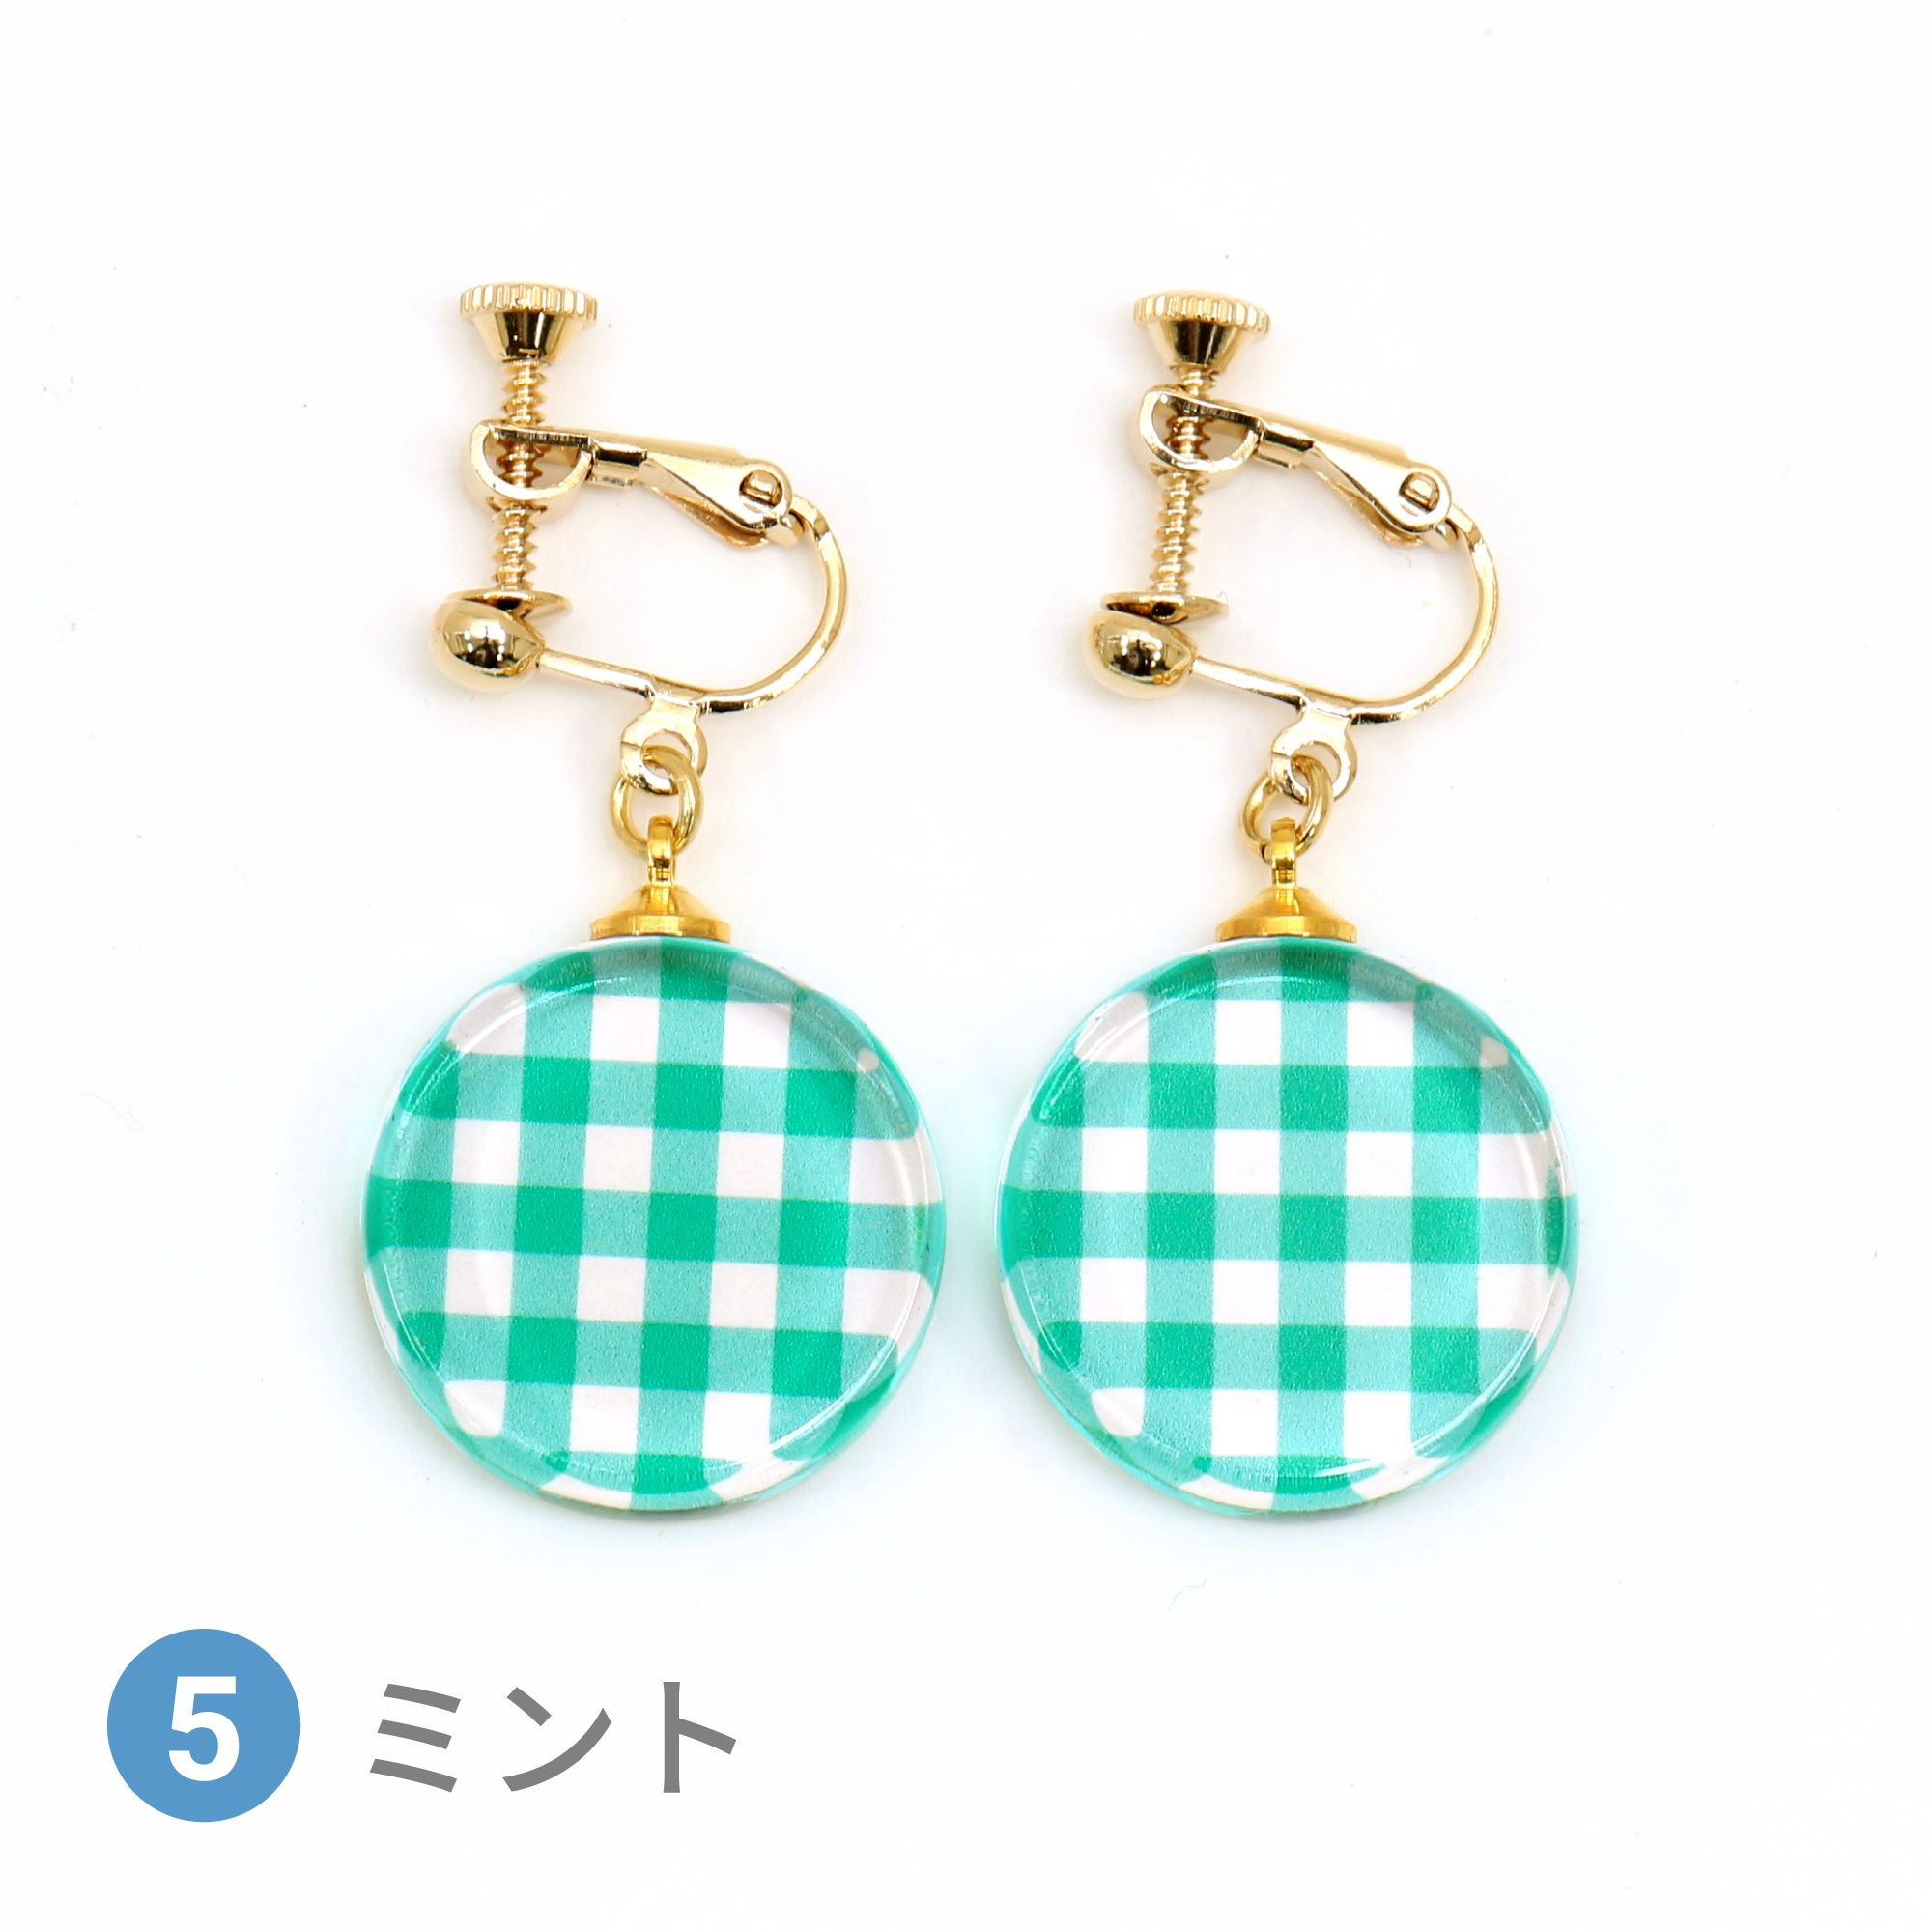 Glass accessories Earring GINGHAM CHECK mint round shape